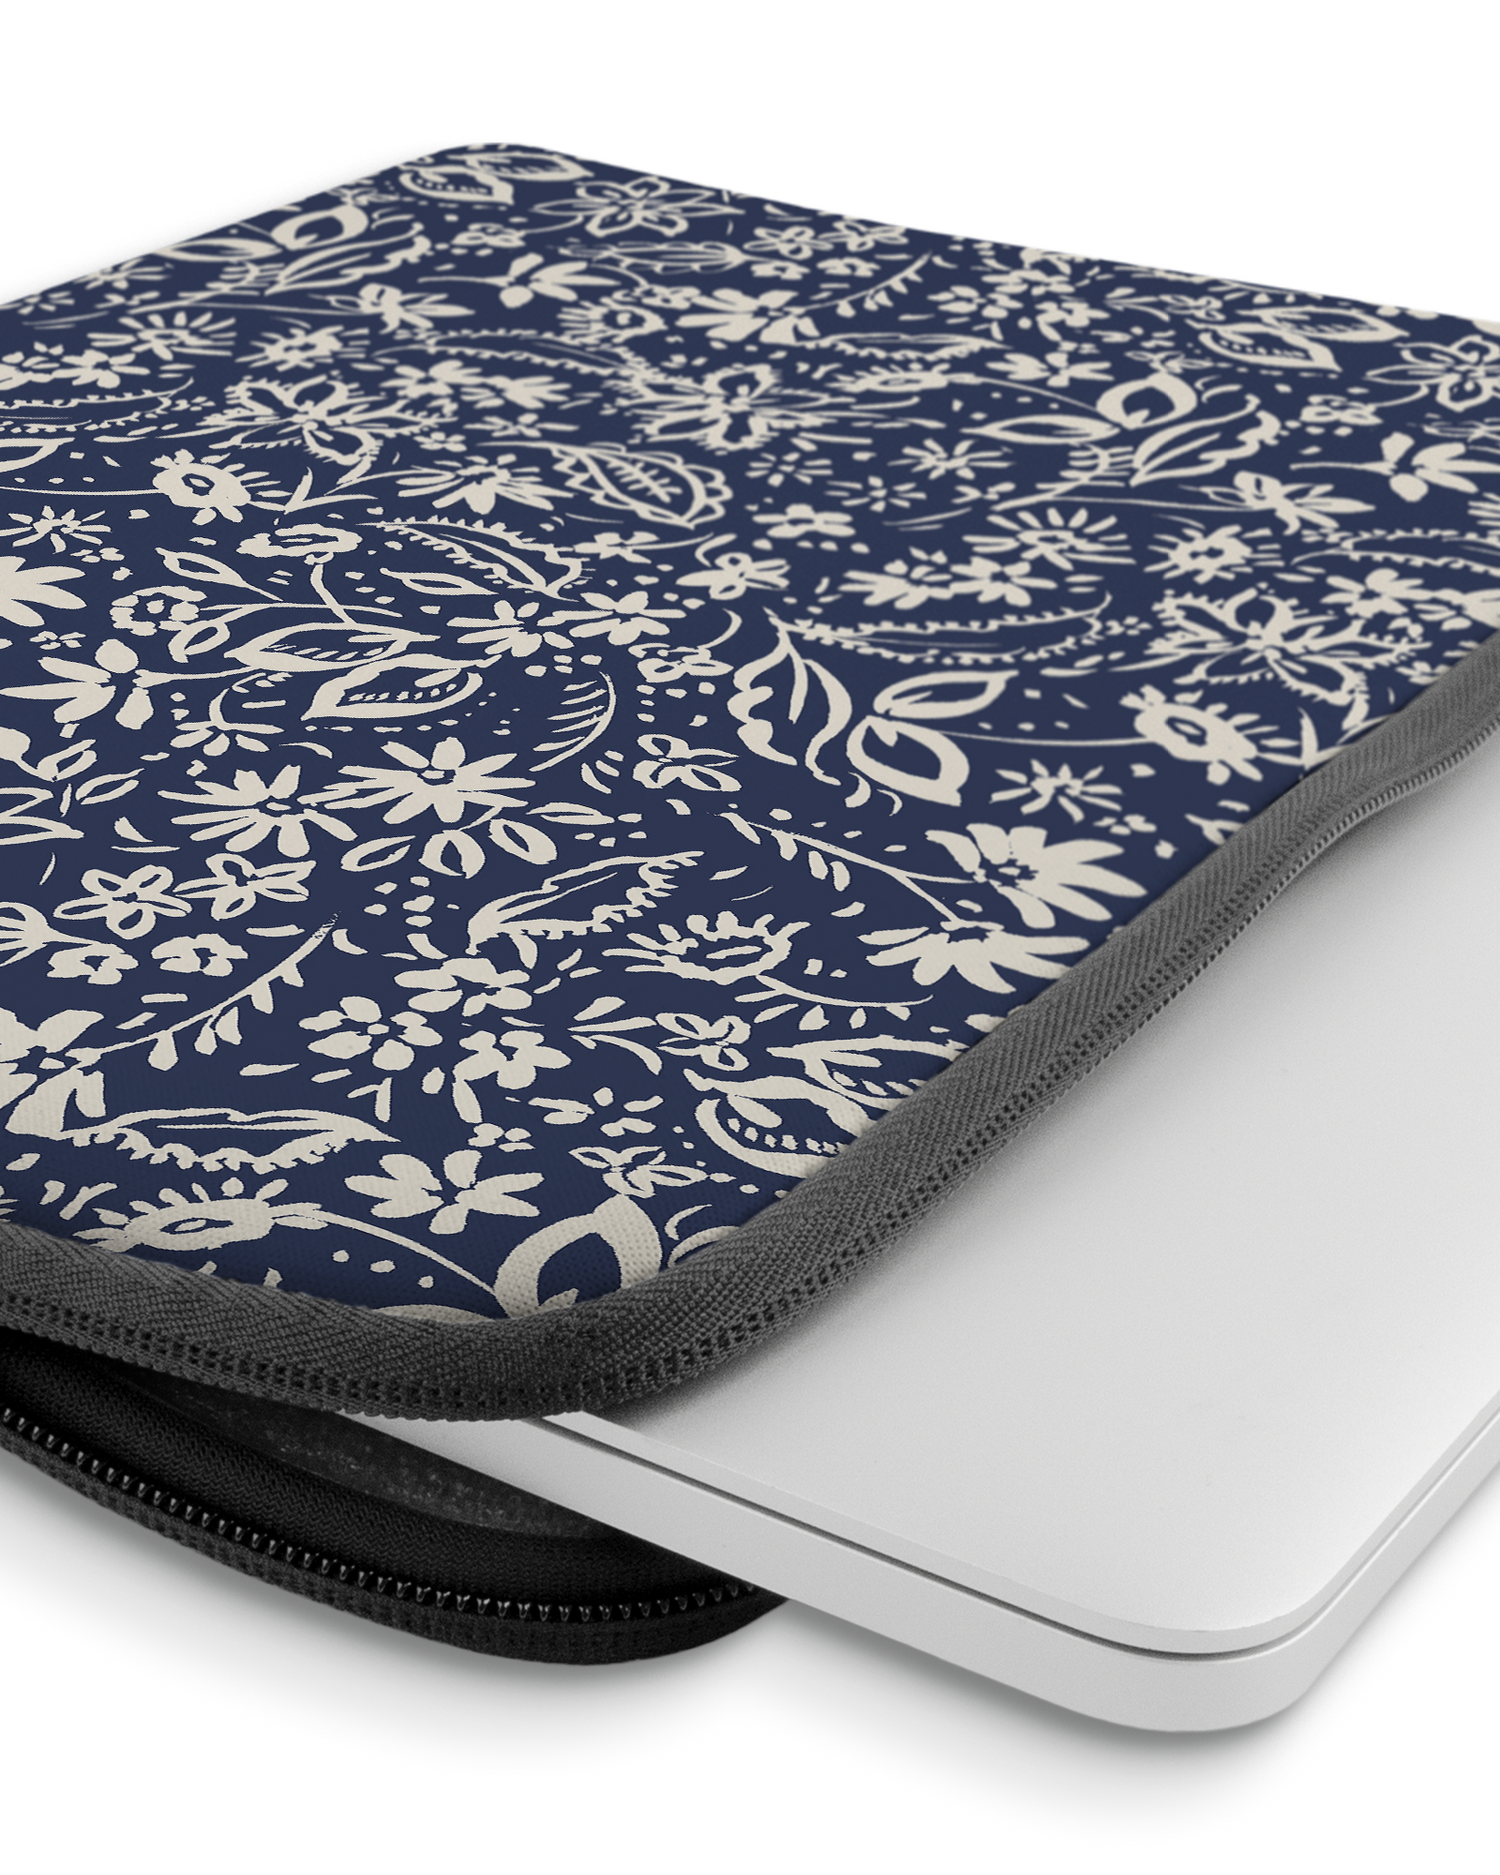 Ditsy Blue Paisley Laptop Case 14 inch with device inside